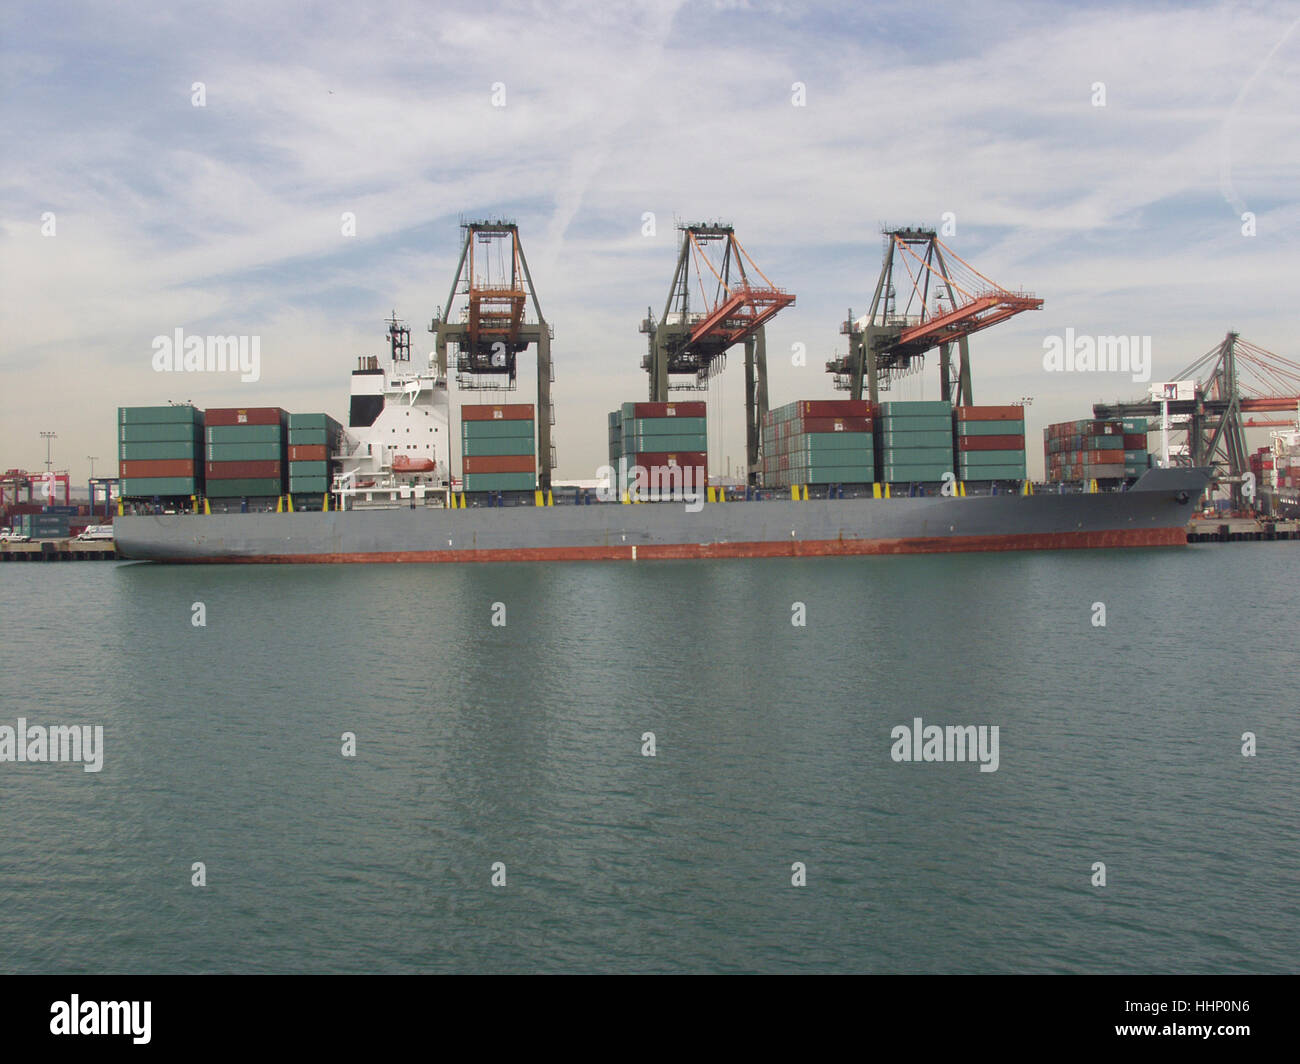 Cranes above cargo containers on freighter Stock Photo